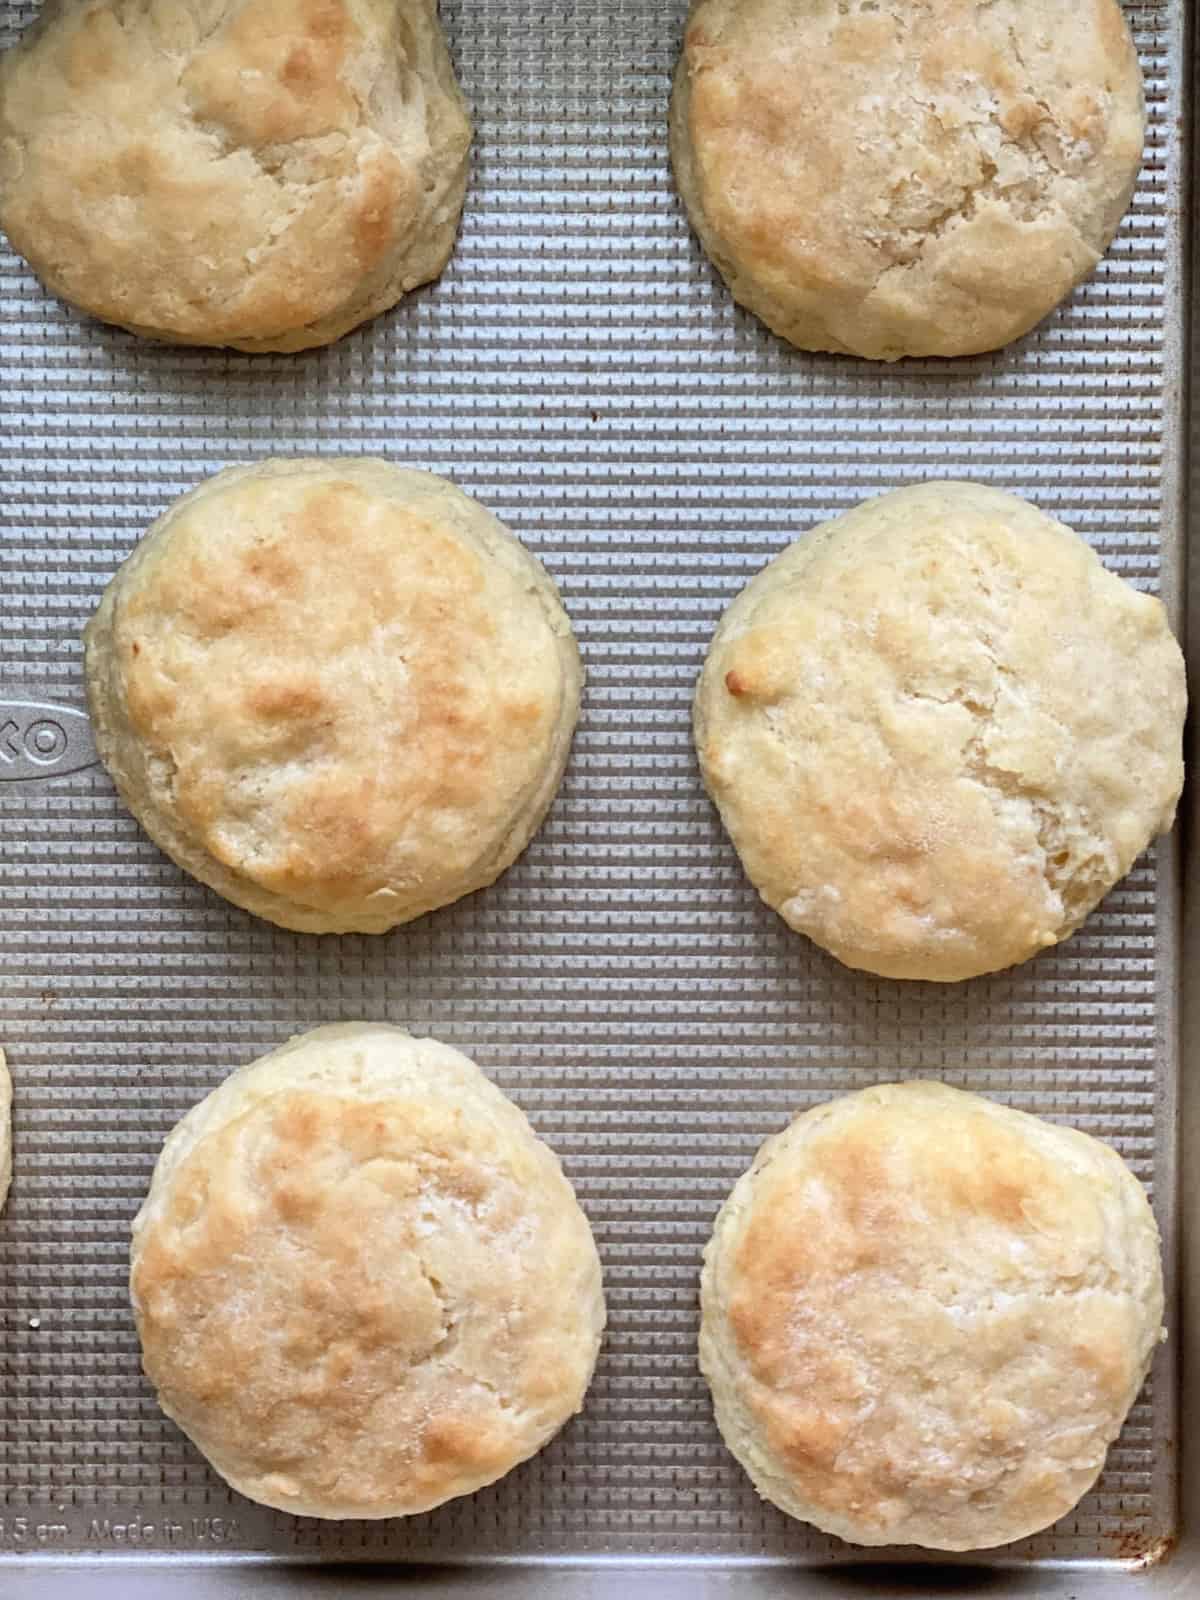 Top view of cooked biscuits on a golden baking sheet.